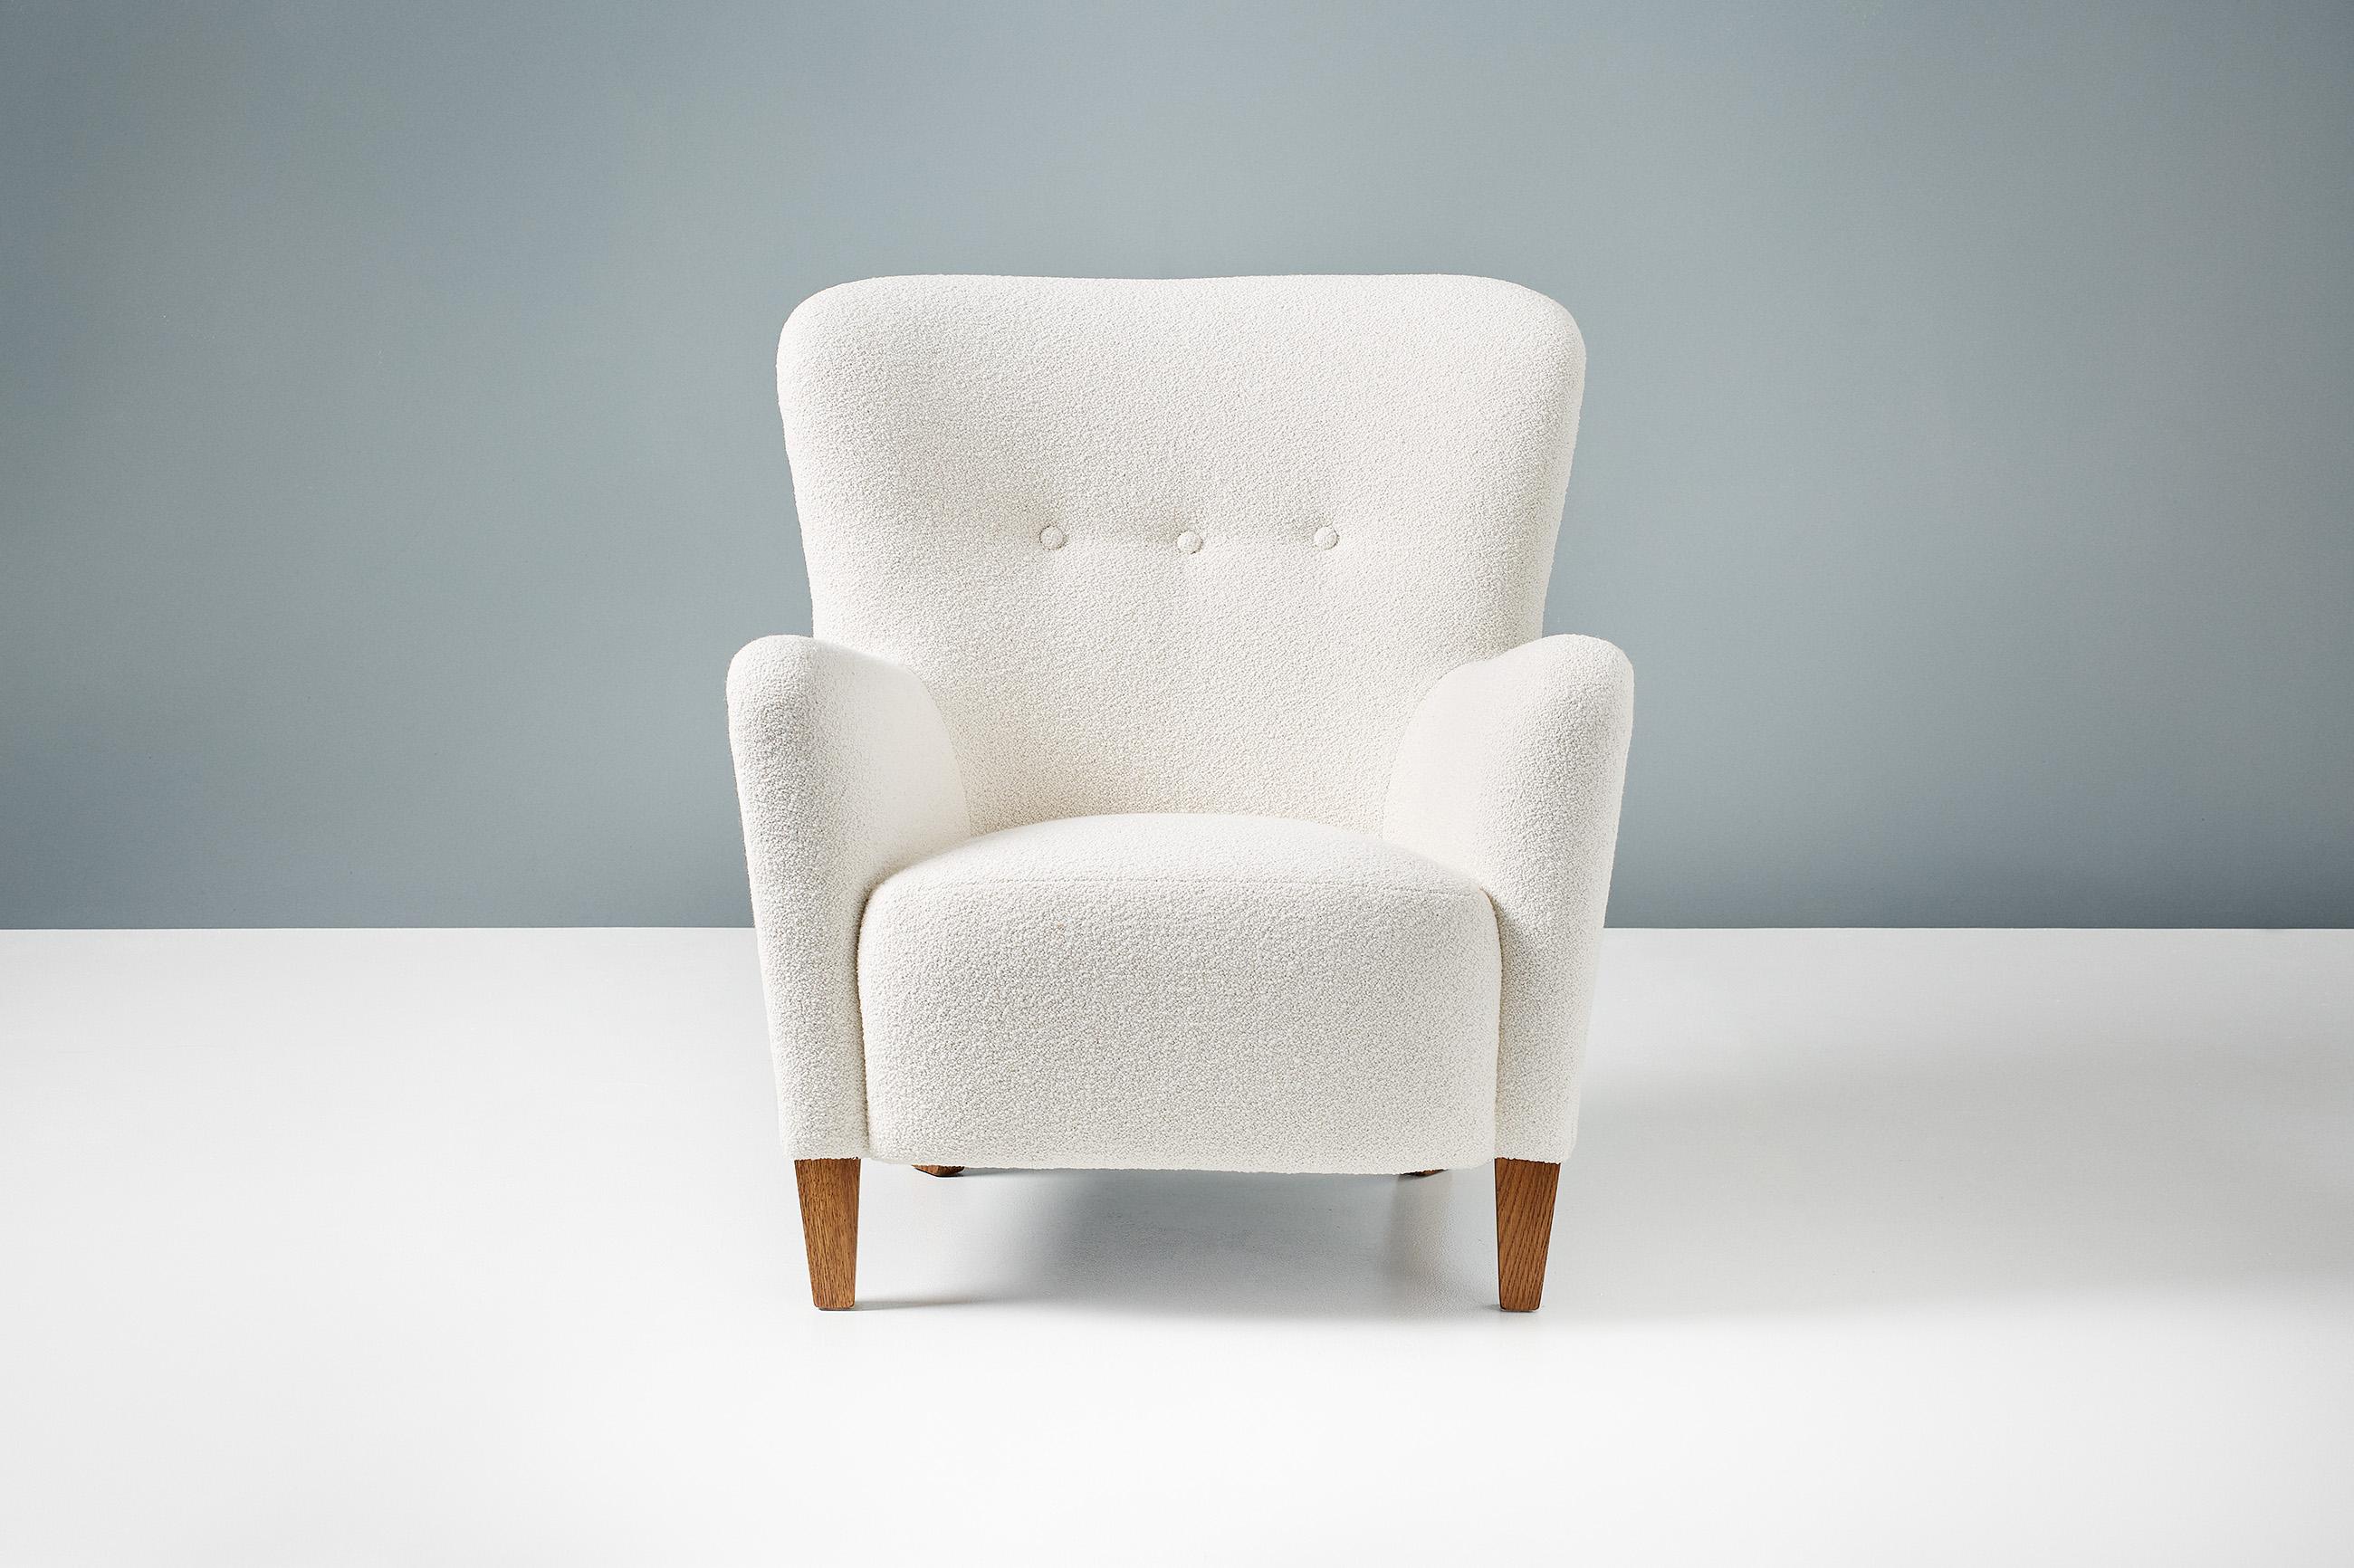 Dagmar design

RYO Armchairs

A pair of custom made lounge chairs developed and produced at our workshops in London using the highest quality materials. These examples are upholstered in luxurious cotton-wool blend off-white bouclé fabric. The